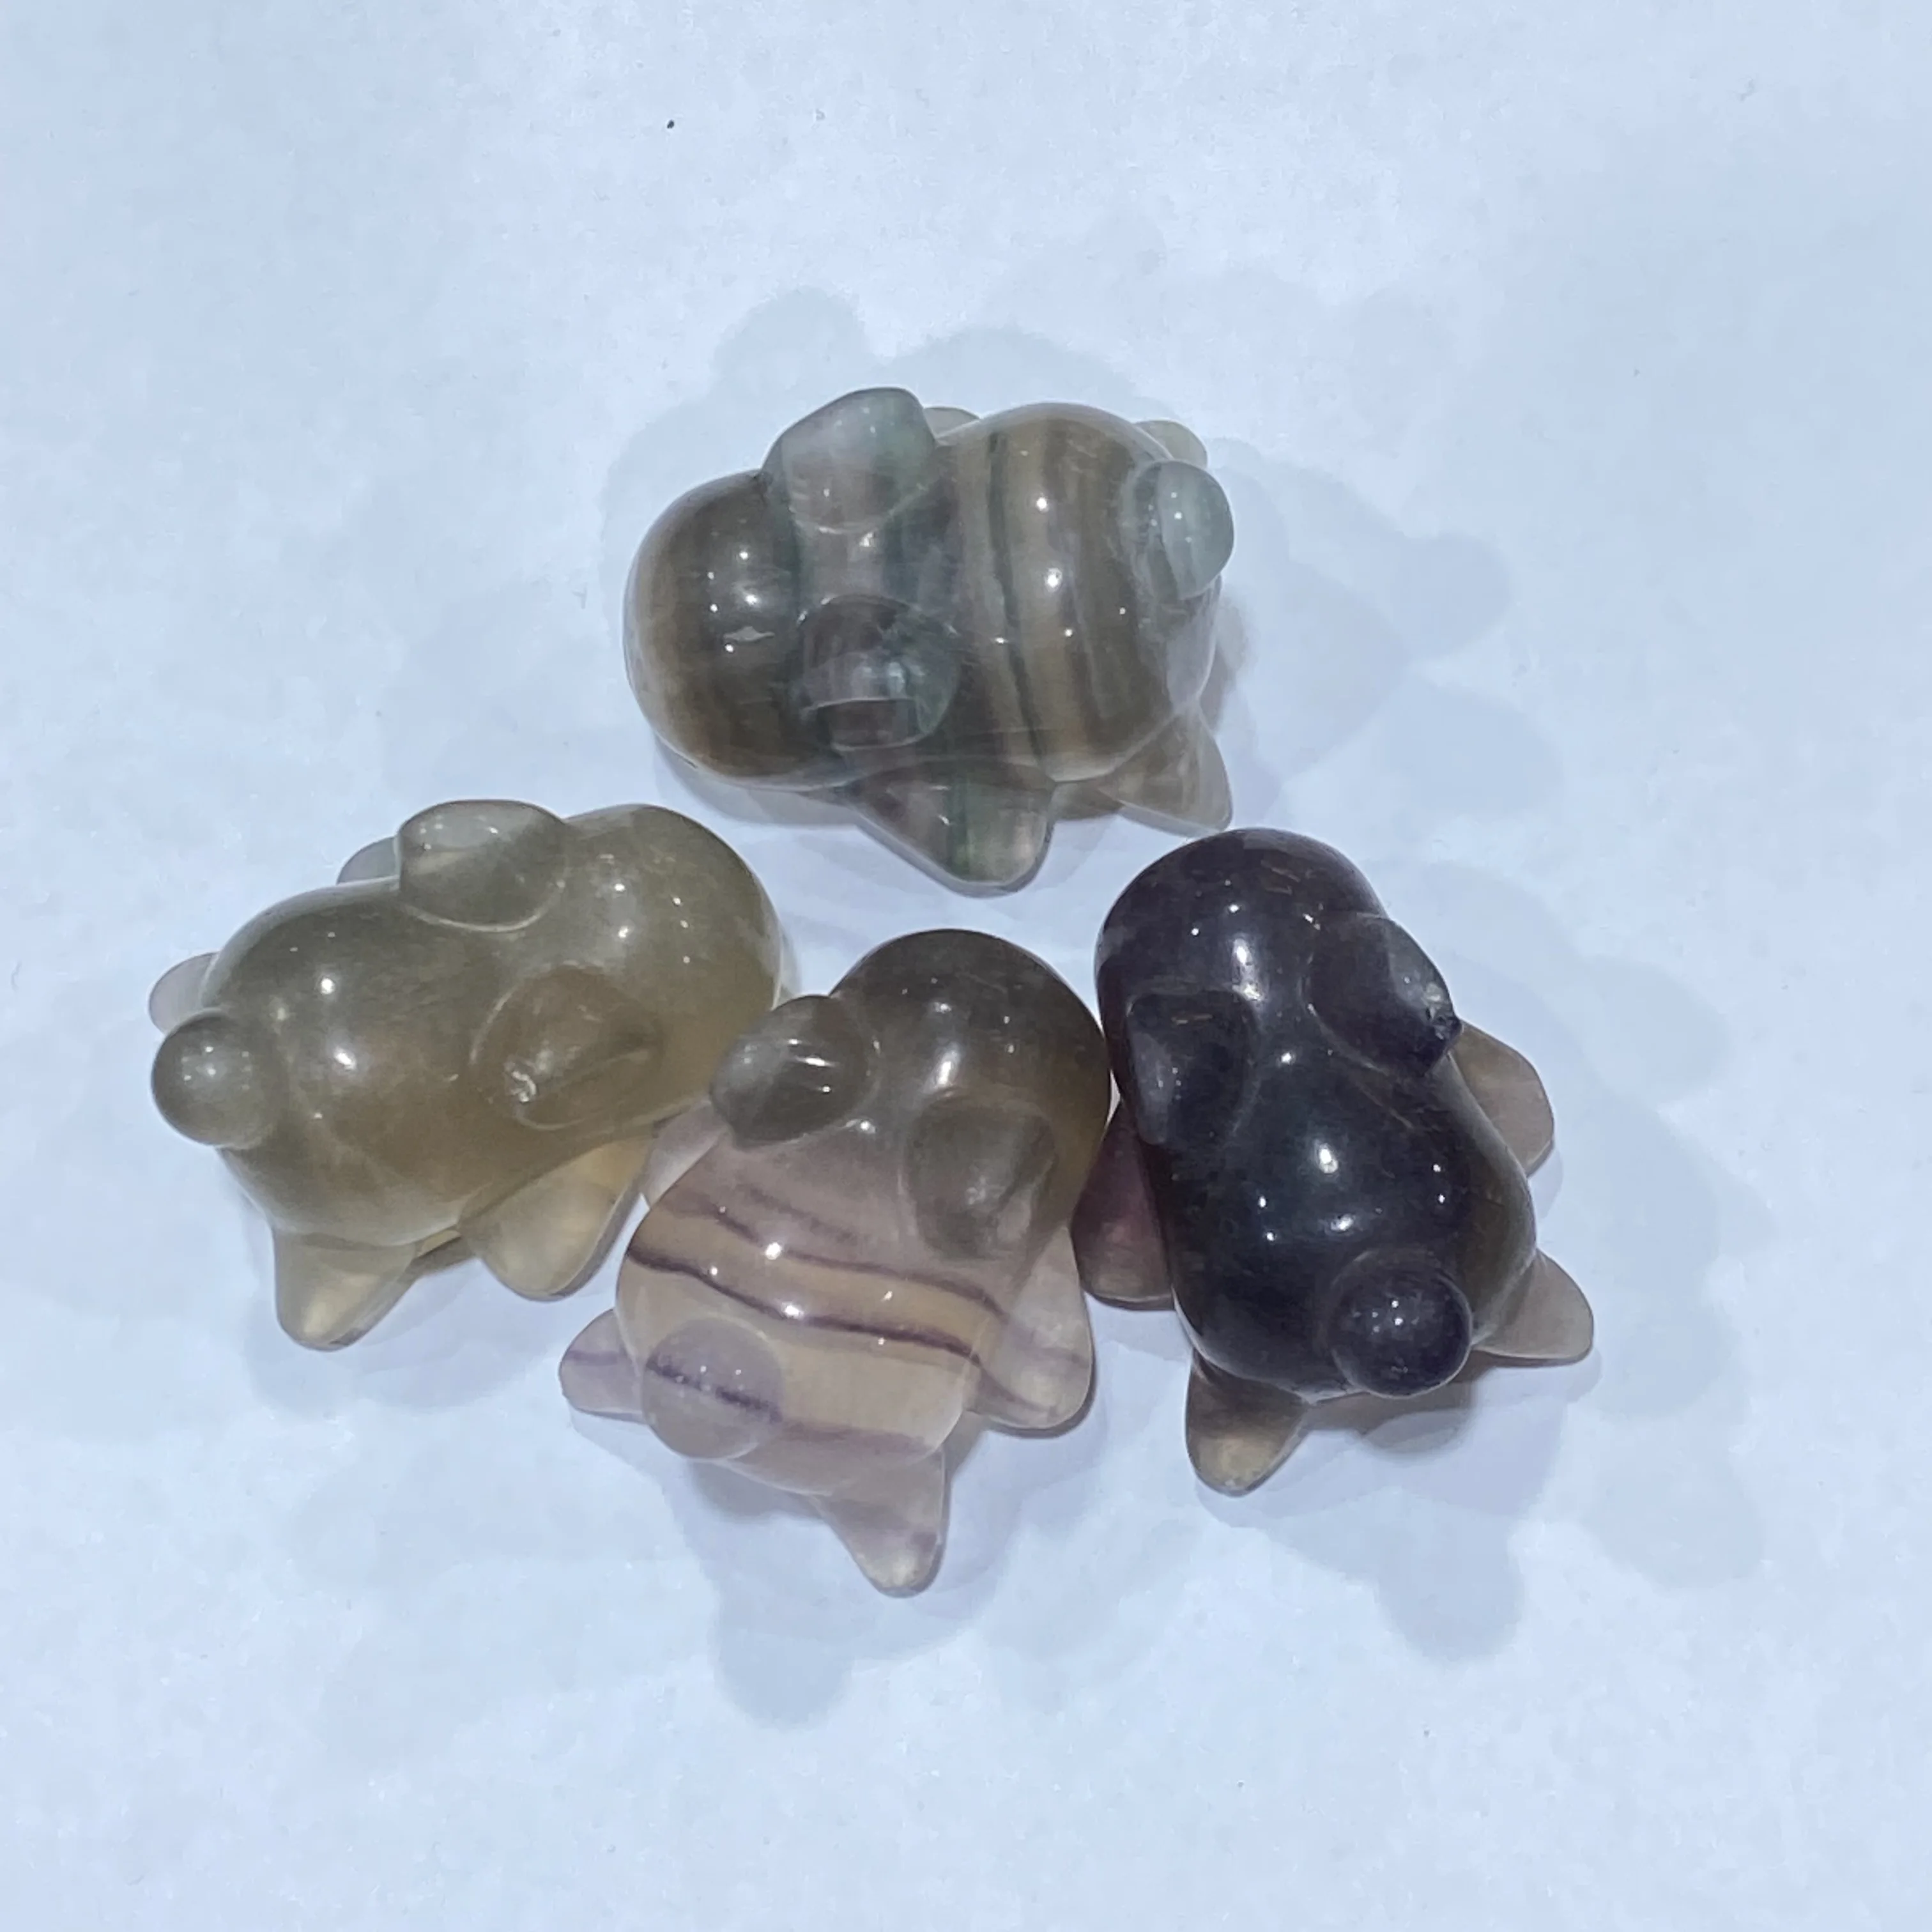 Wholesale Crystal Mini Hand Carved Animal Crafts Natural Crystal Polishing Fluorite Rabbit For Home Decoration